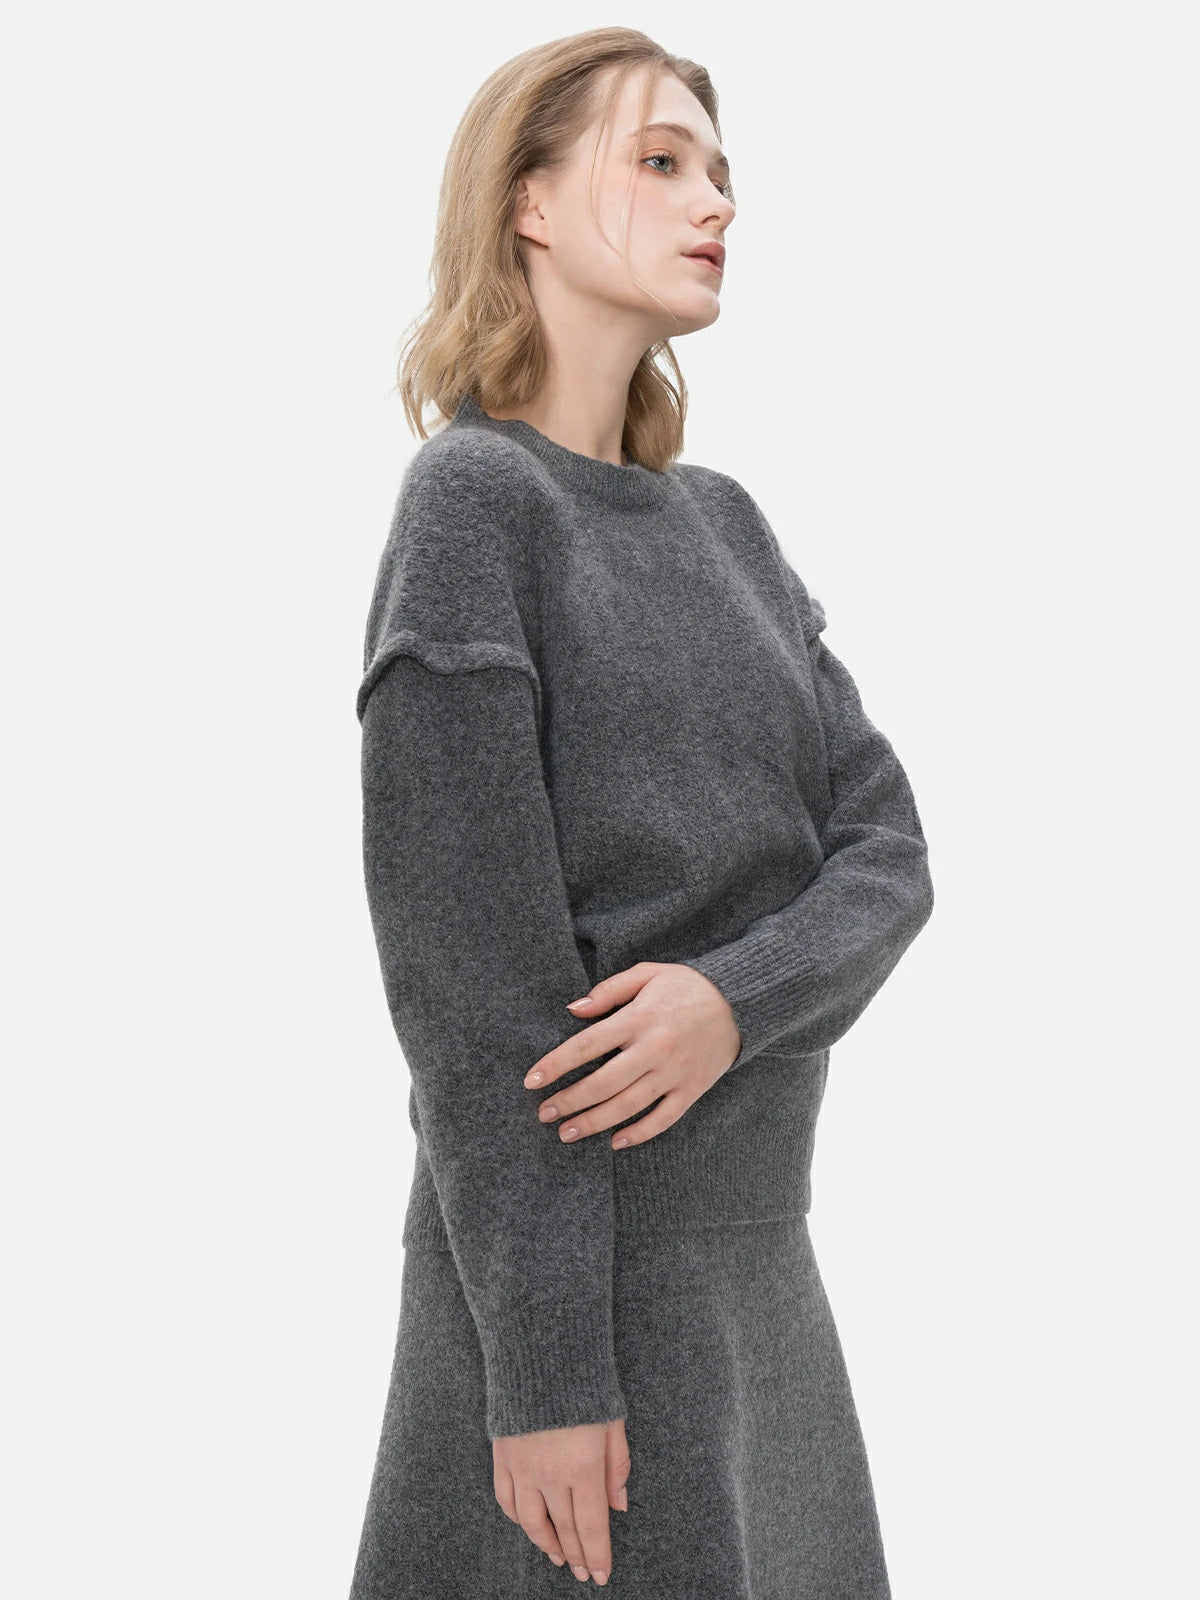 Immerse yourself in the timeless appeal of this gray round-neck sweater, characterized by classic knit details and a comfortable fit.